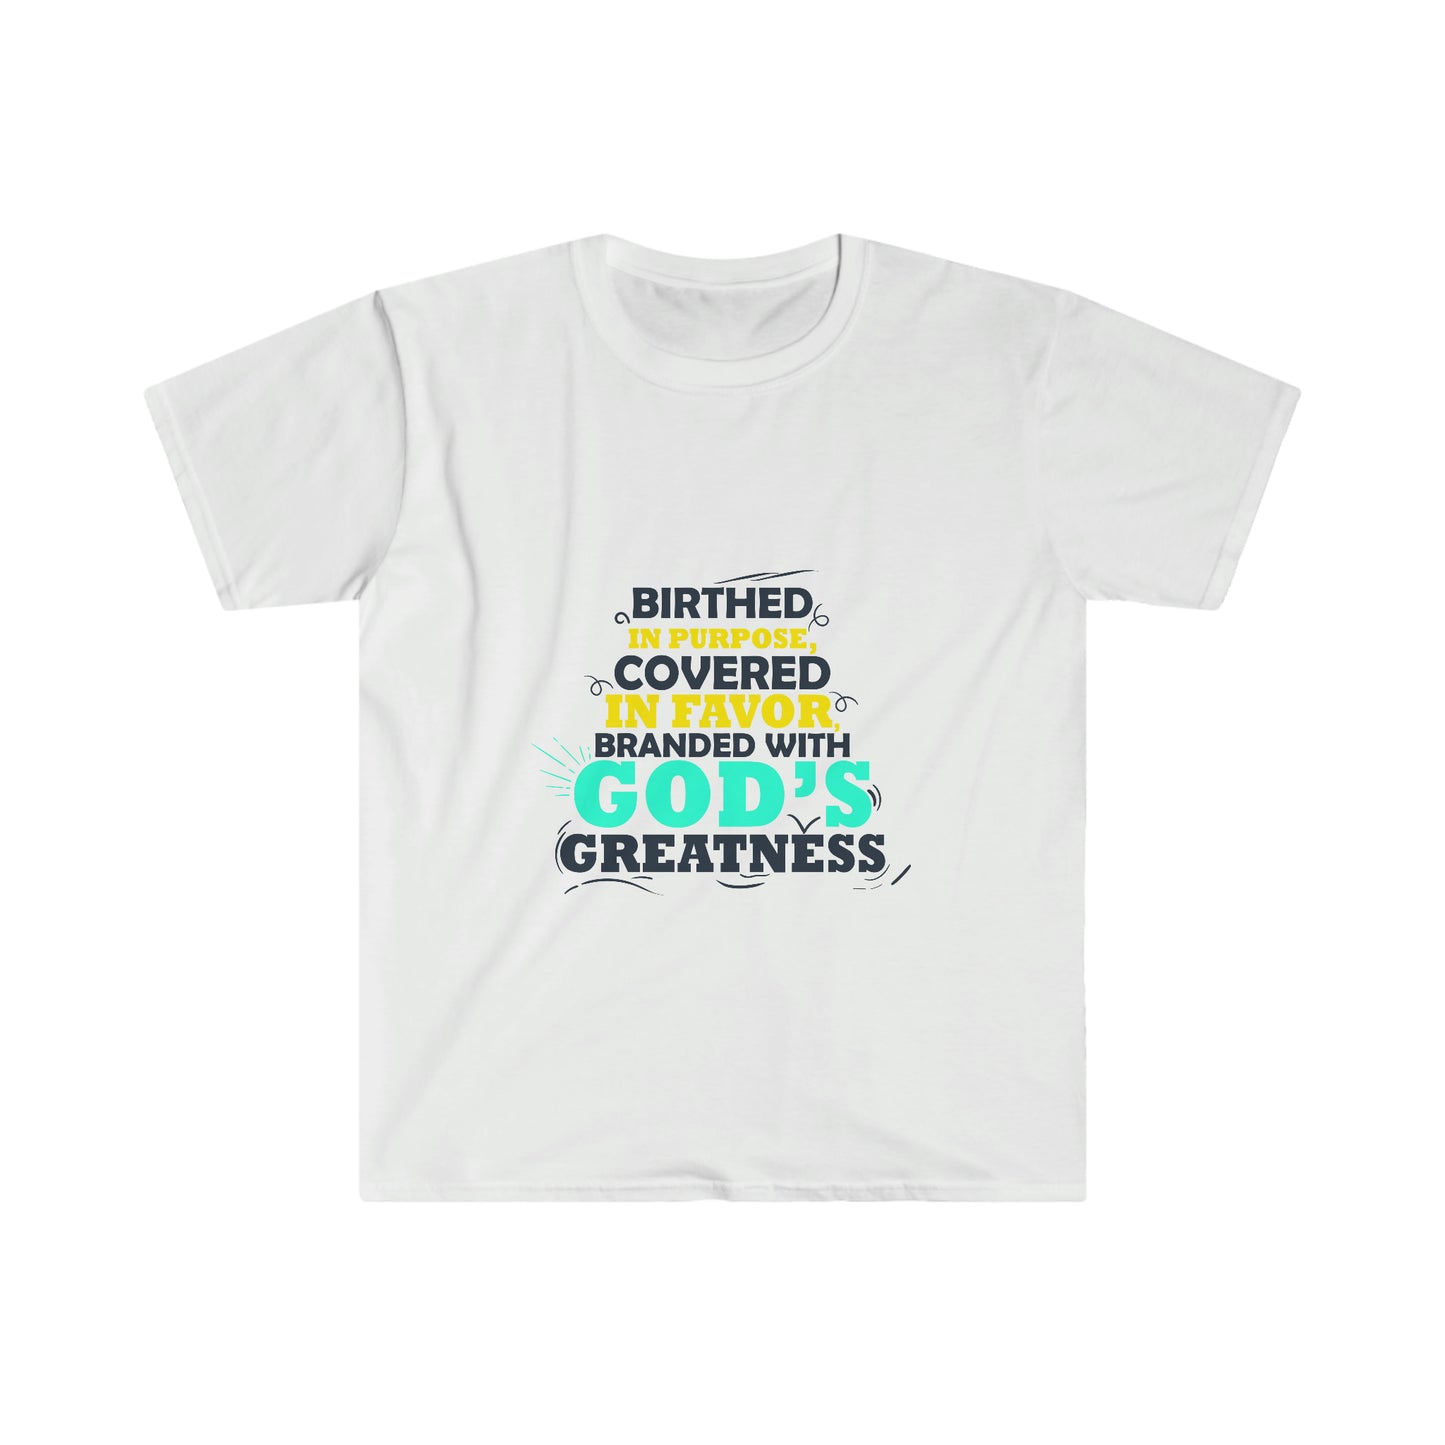 Birthed In Purpose, Covered In Favor, Branded With God's Greatness Unisex T-shirt